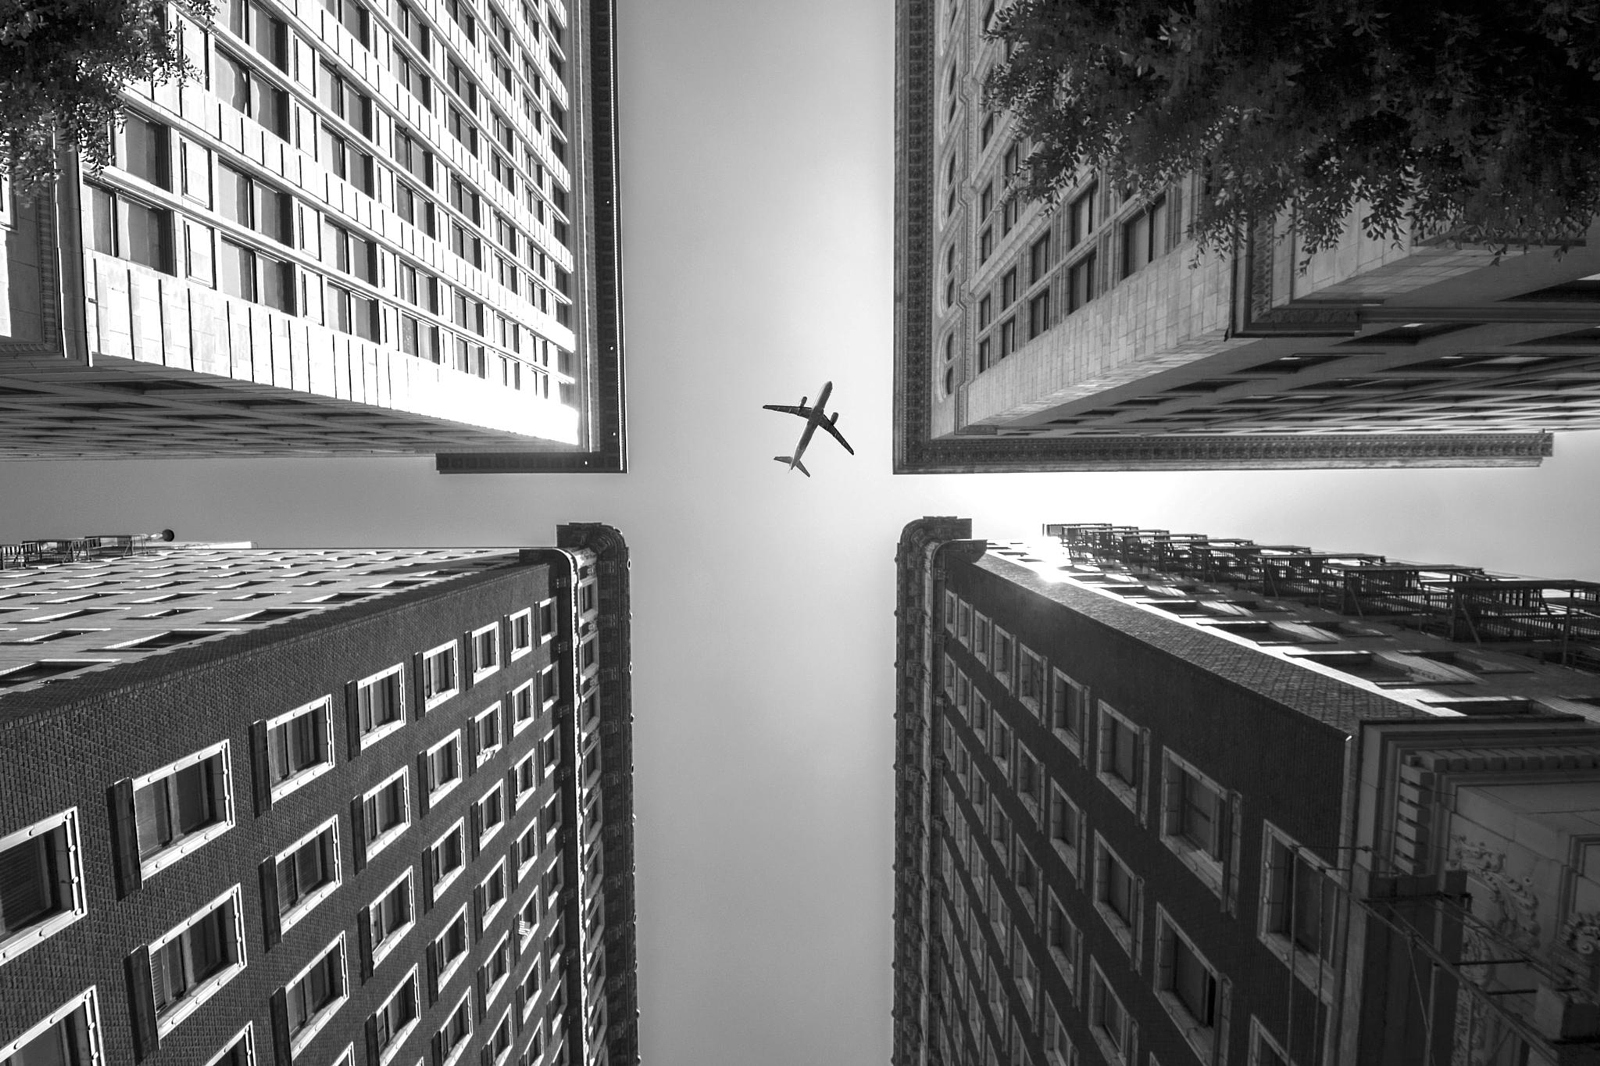 Airplanes and Architecture: A Match Made in Photo Heaven